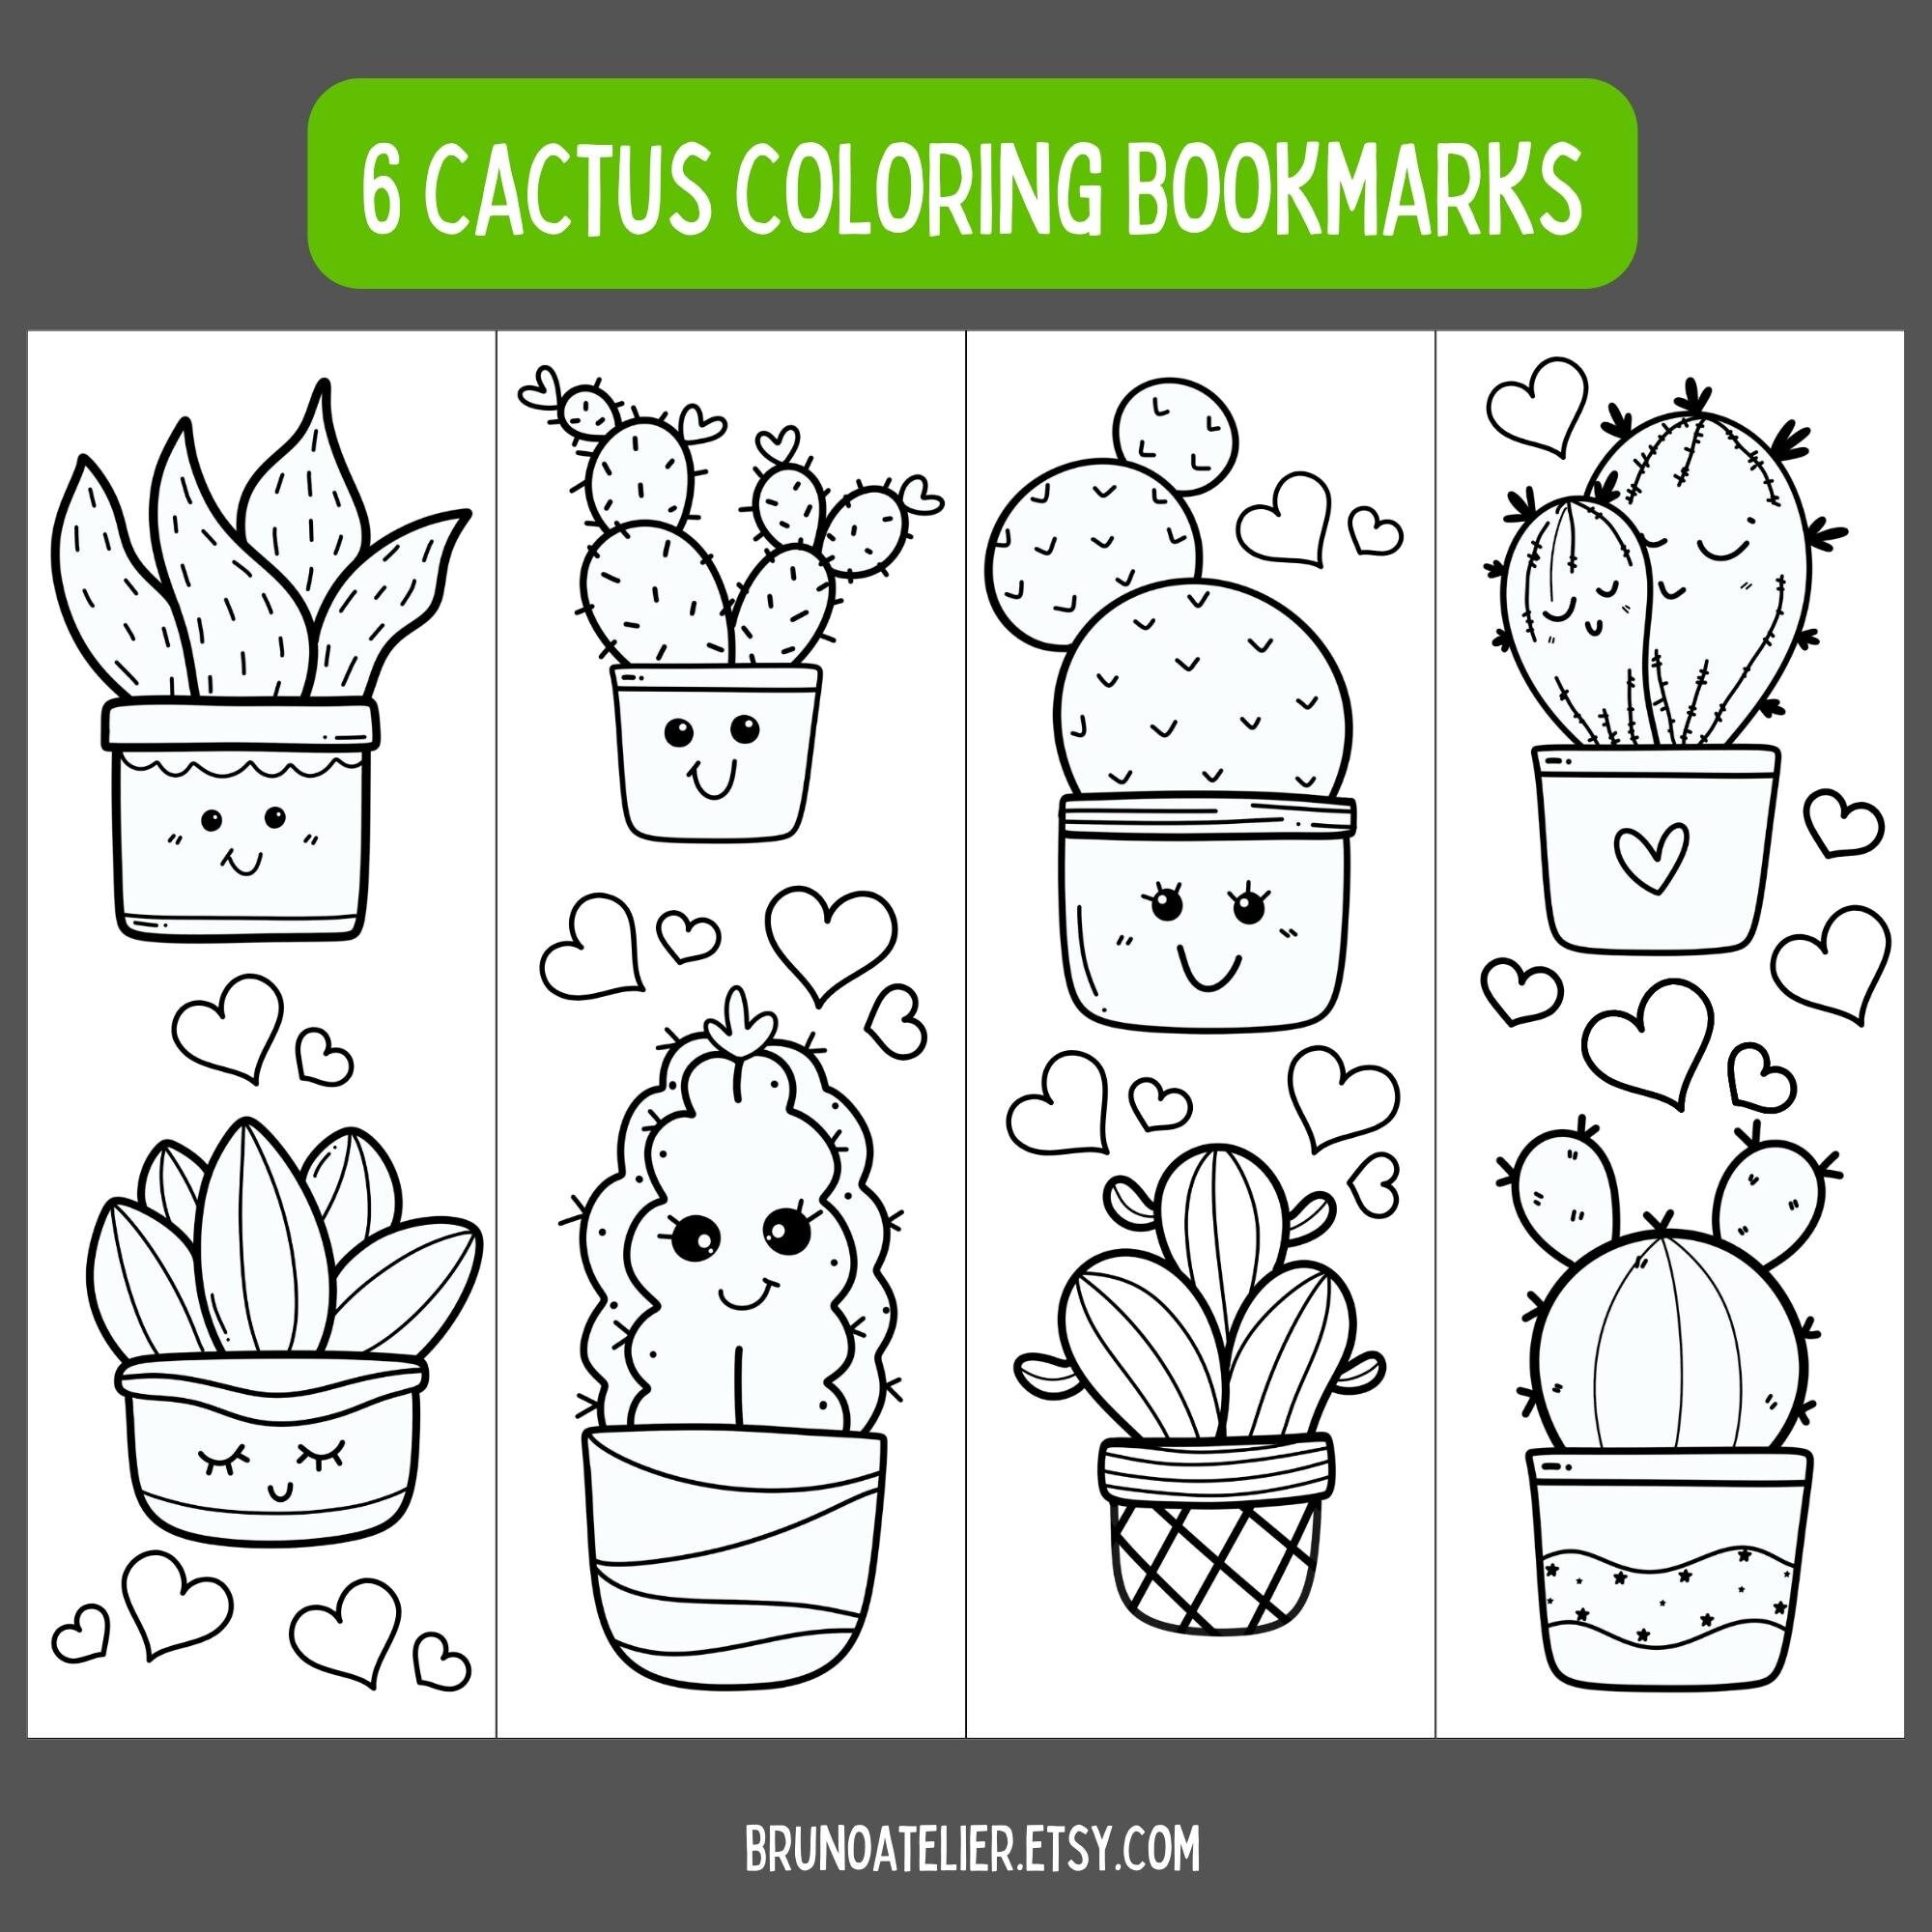 Cactus bookmarks printable bookmarks to color cactus